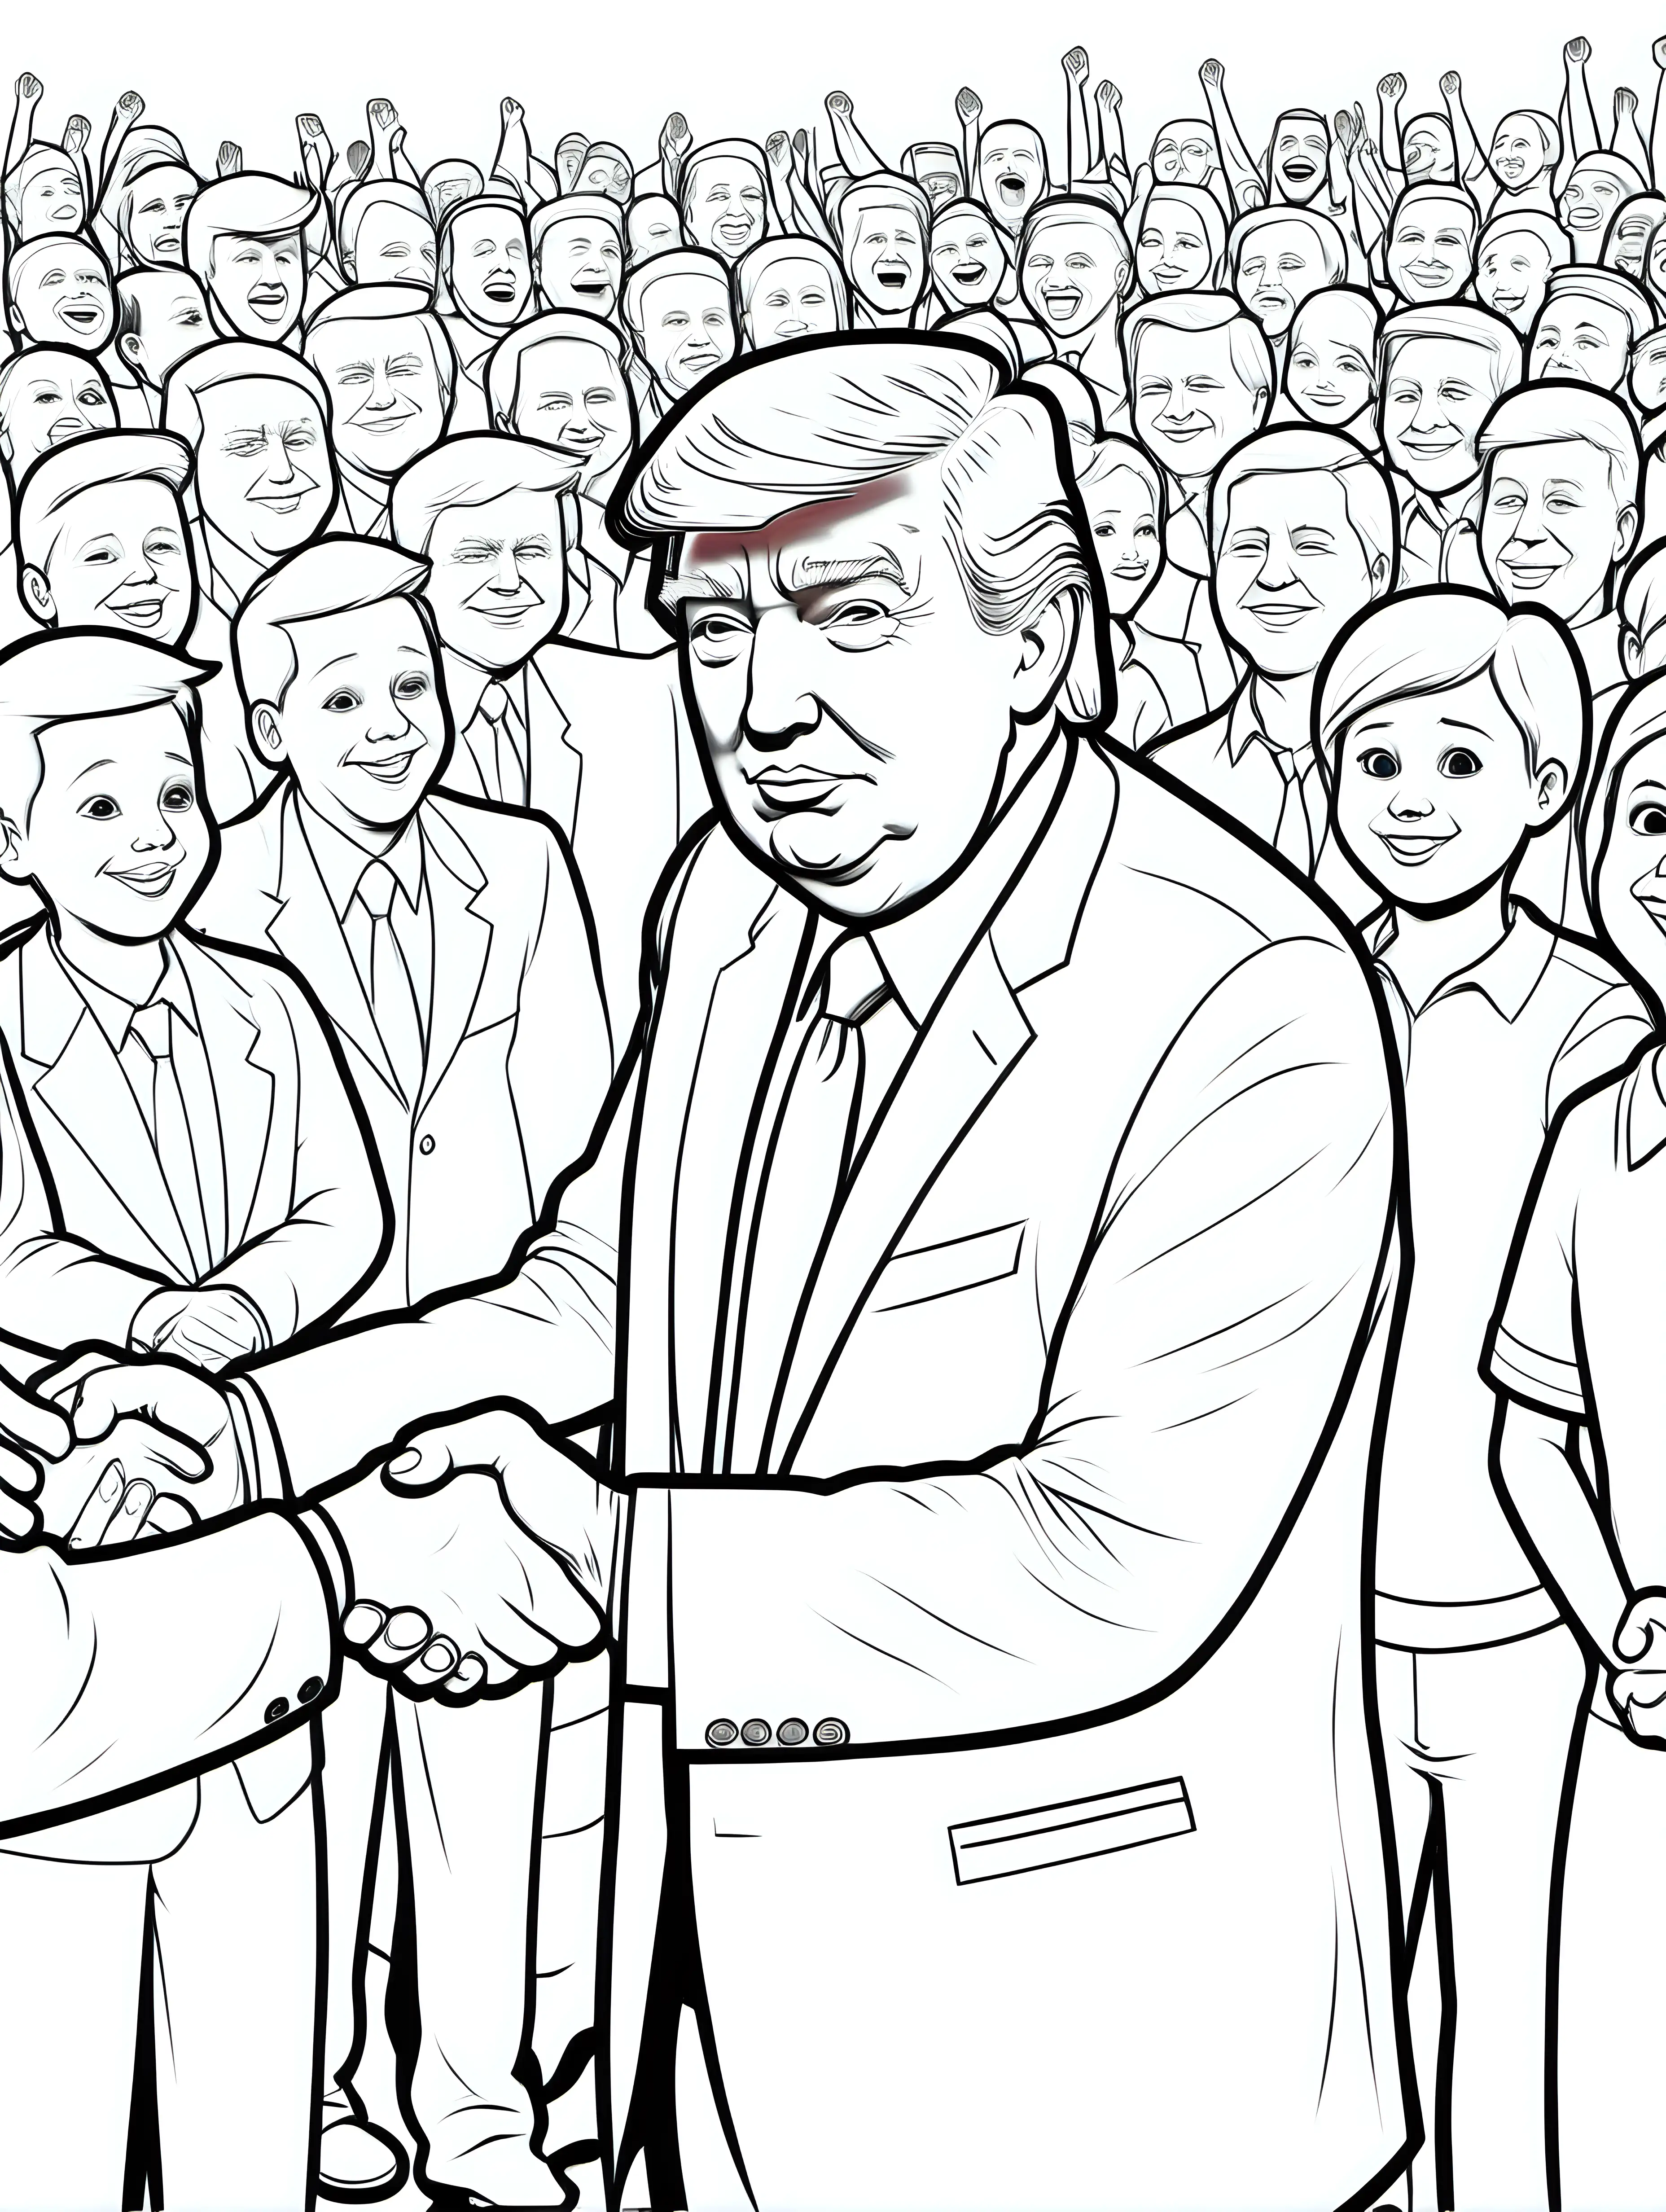 Realistic Donald Trump Shaking Hands Coloring Page